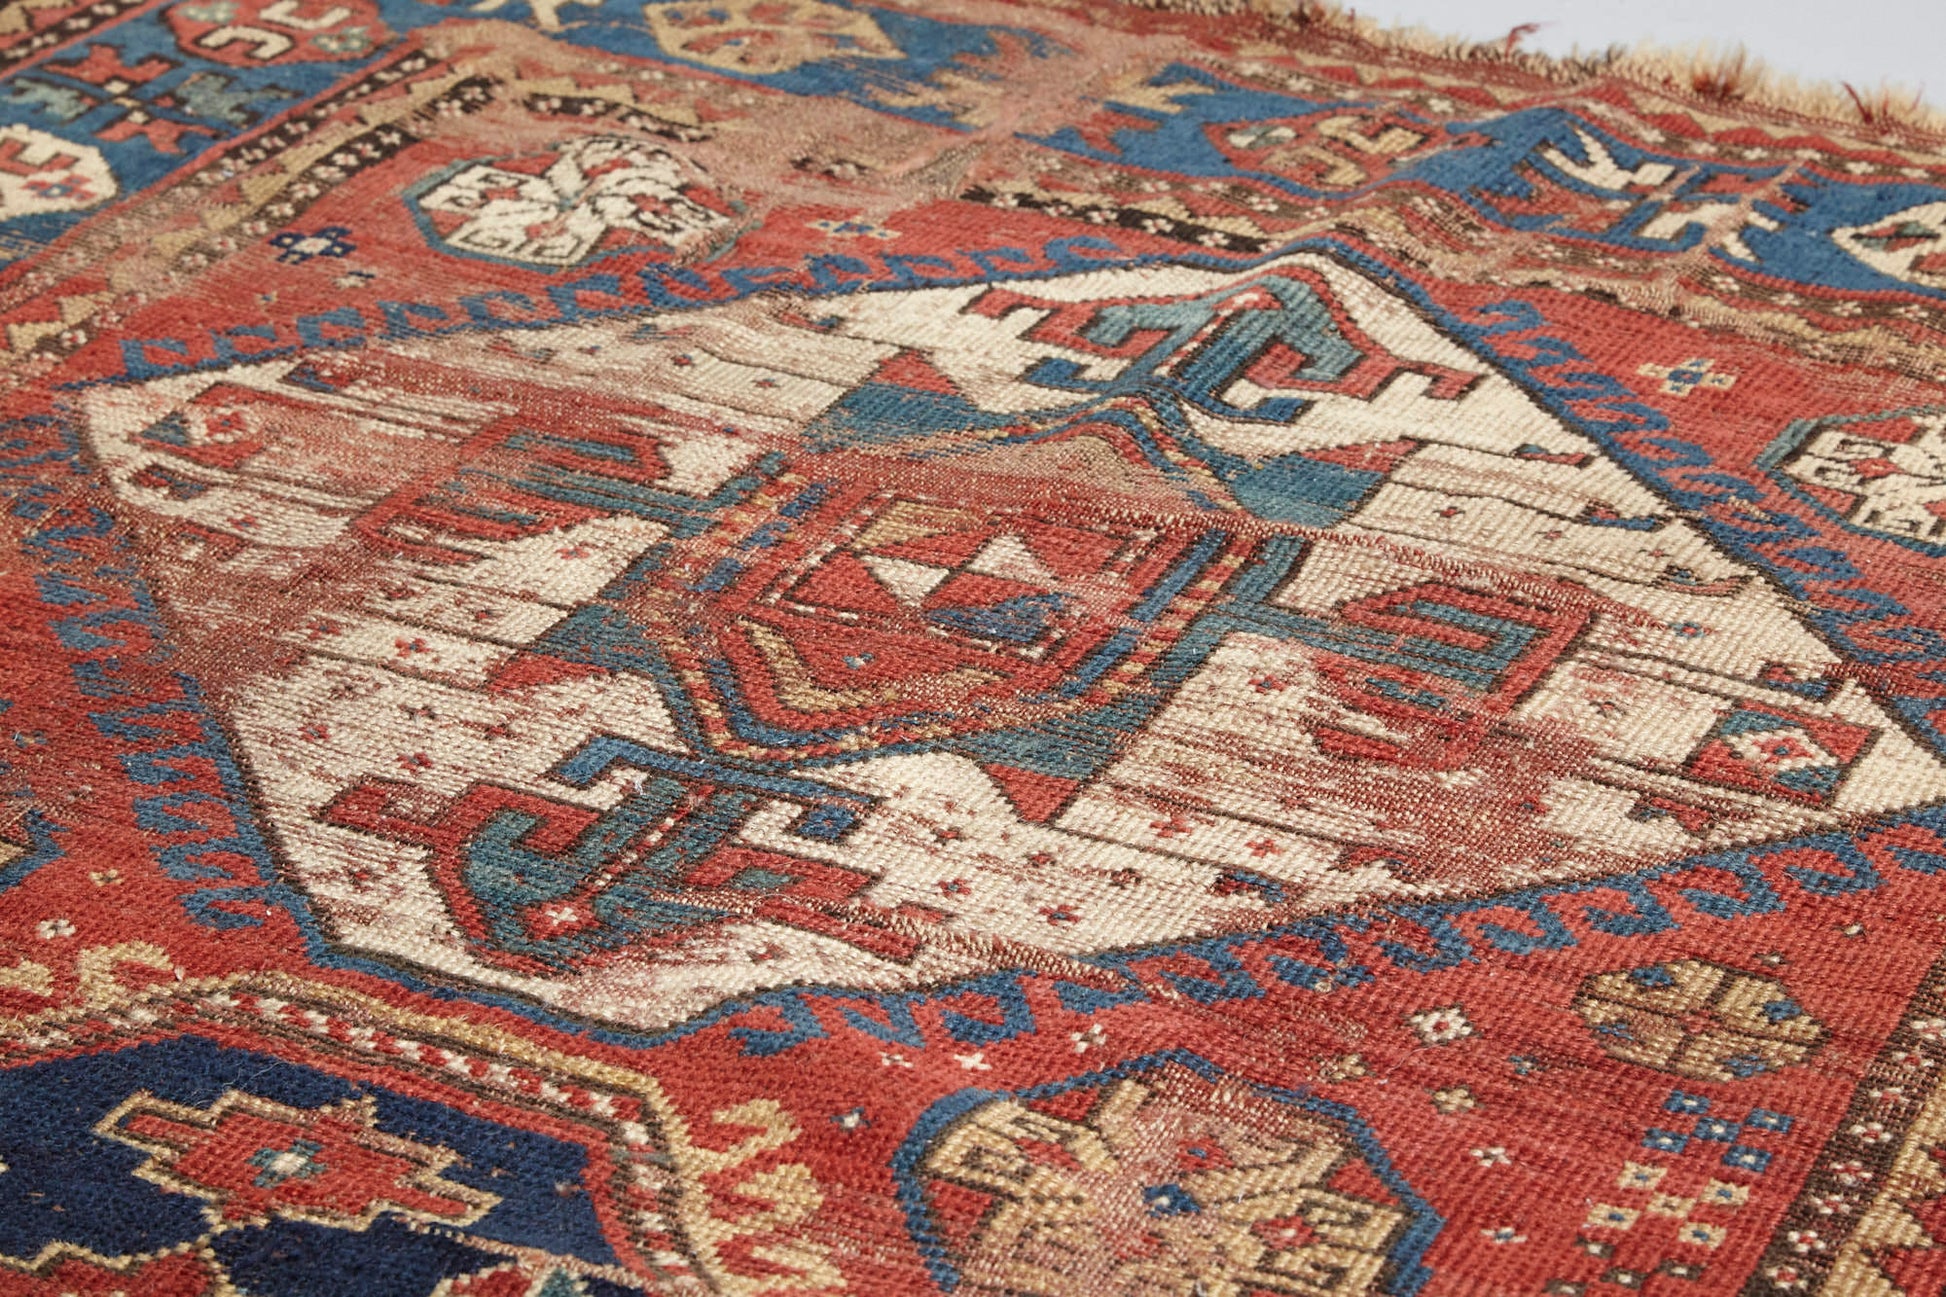 Beautifully worn antique Kazak Persian Rug with red, blue and cream colors - Available from King Kennedy Rugs Los Angeles